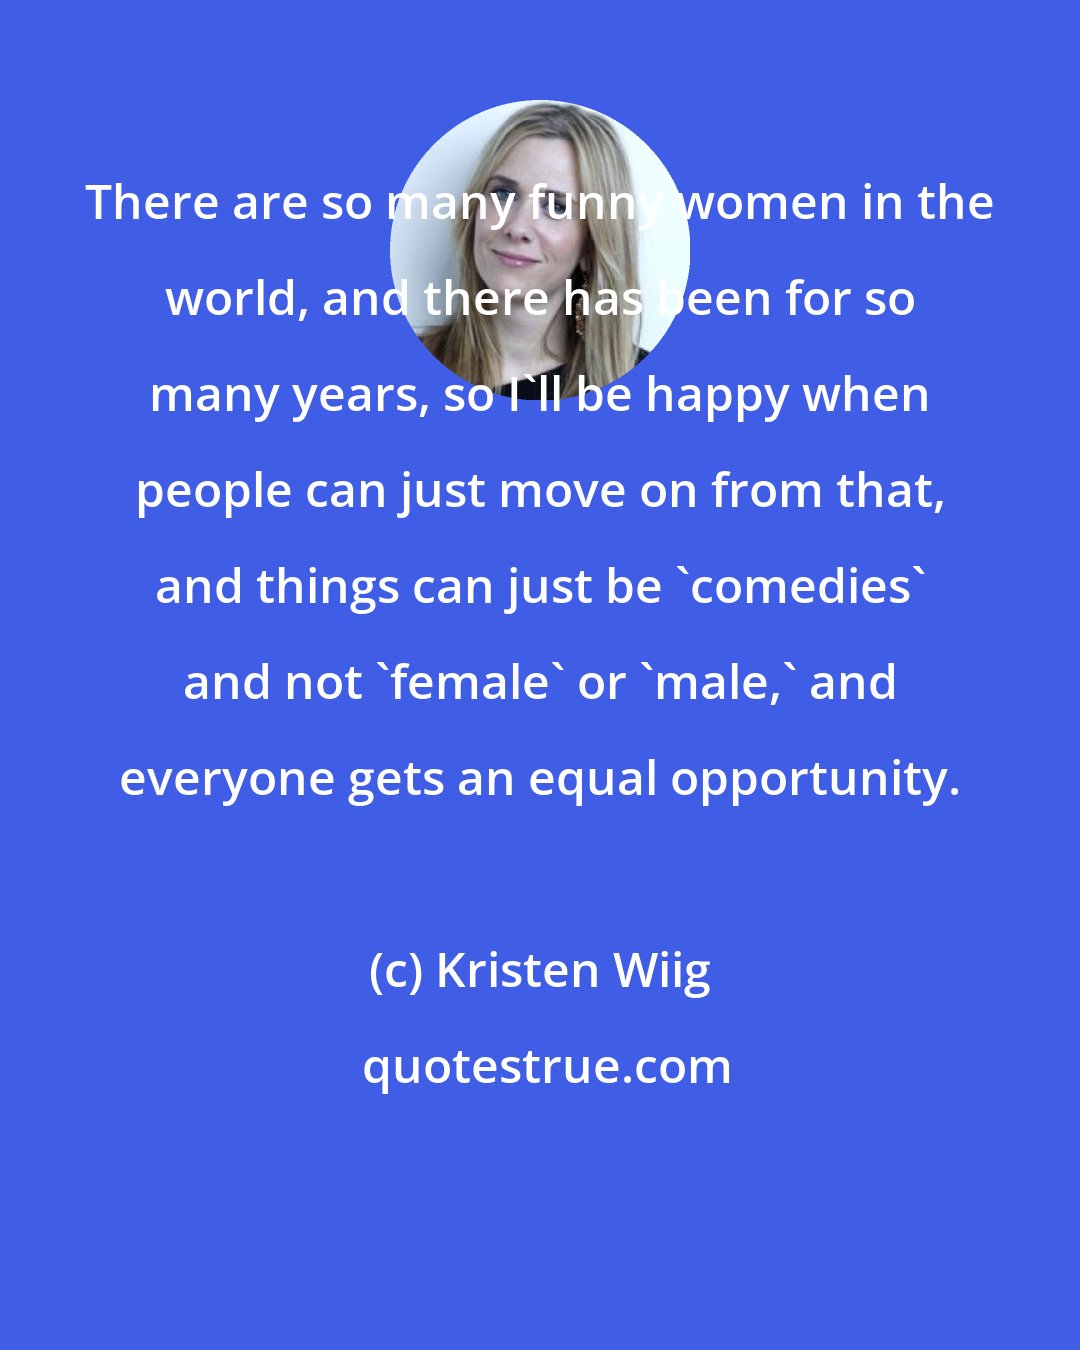 Kristen Wiig: There are so many funny women in the world, and there has been for so many years, so I'll be happy when people can just move on from that, and things can just be 'comedies' and not 'female' or 'male,' and everyone gets an equal opportunity.